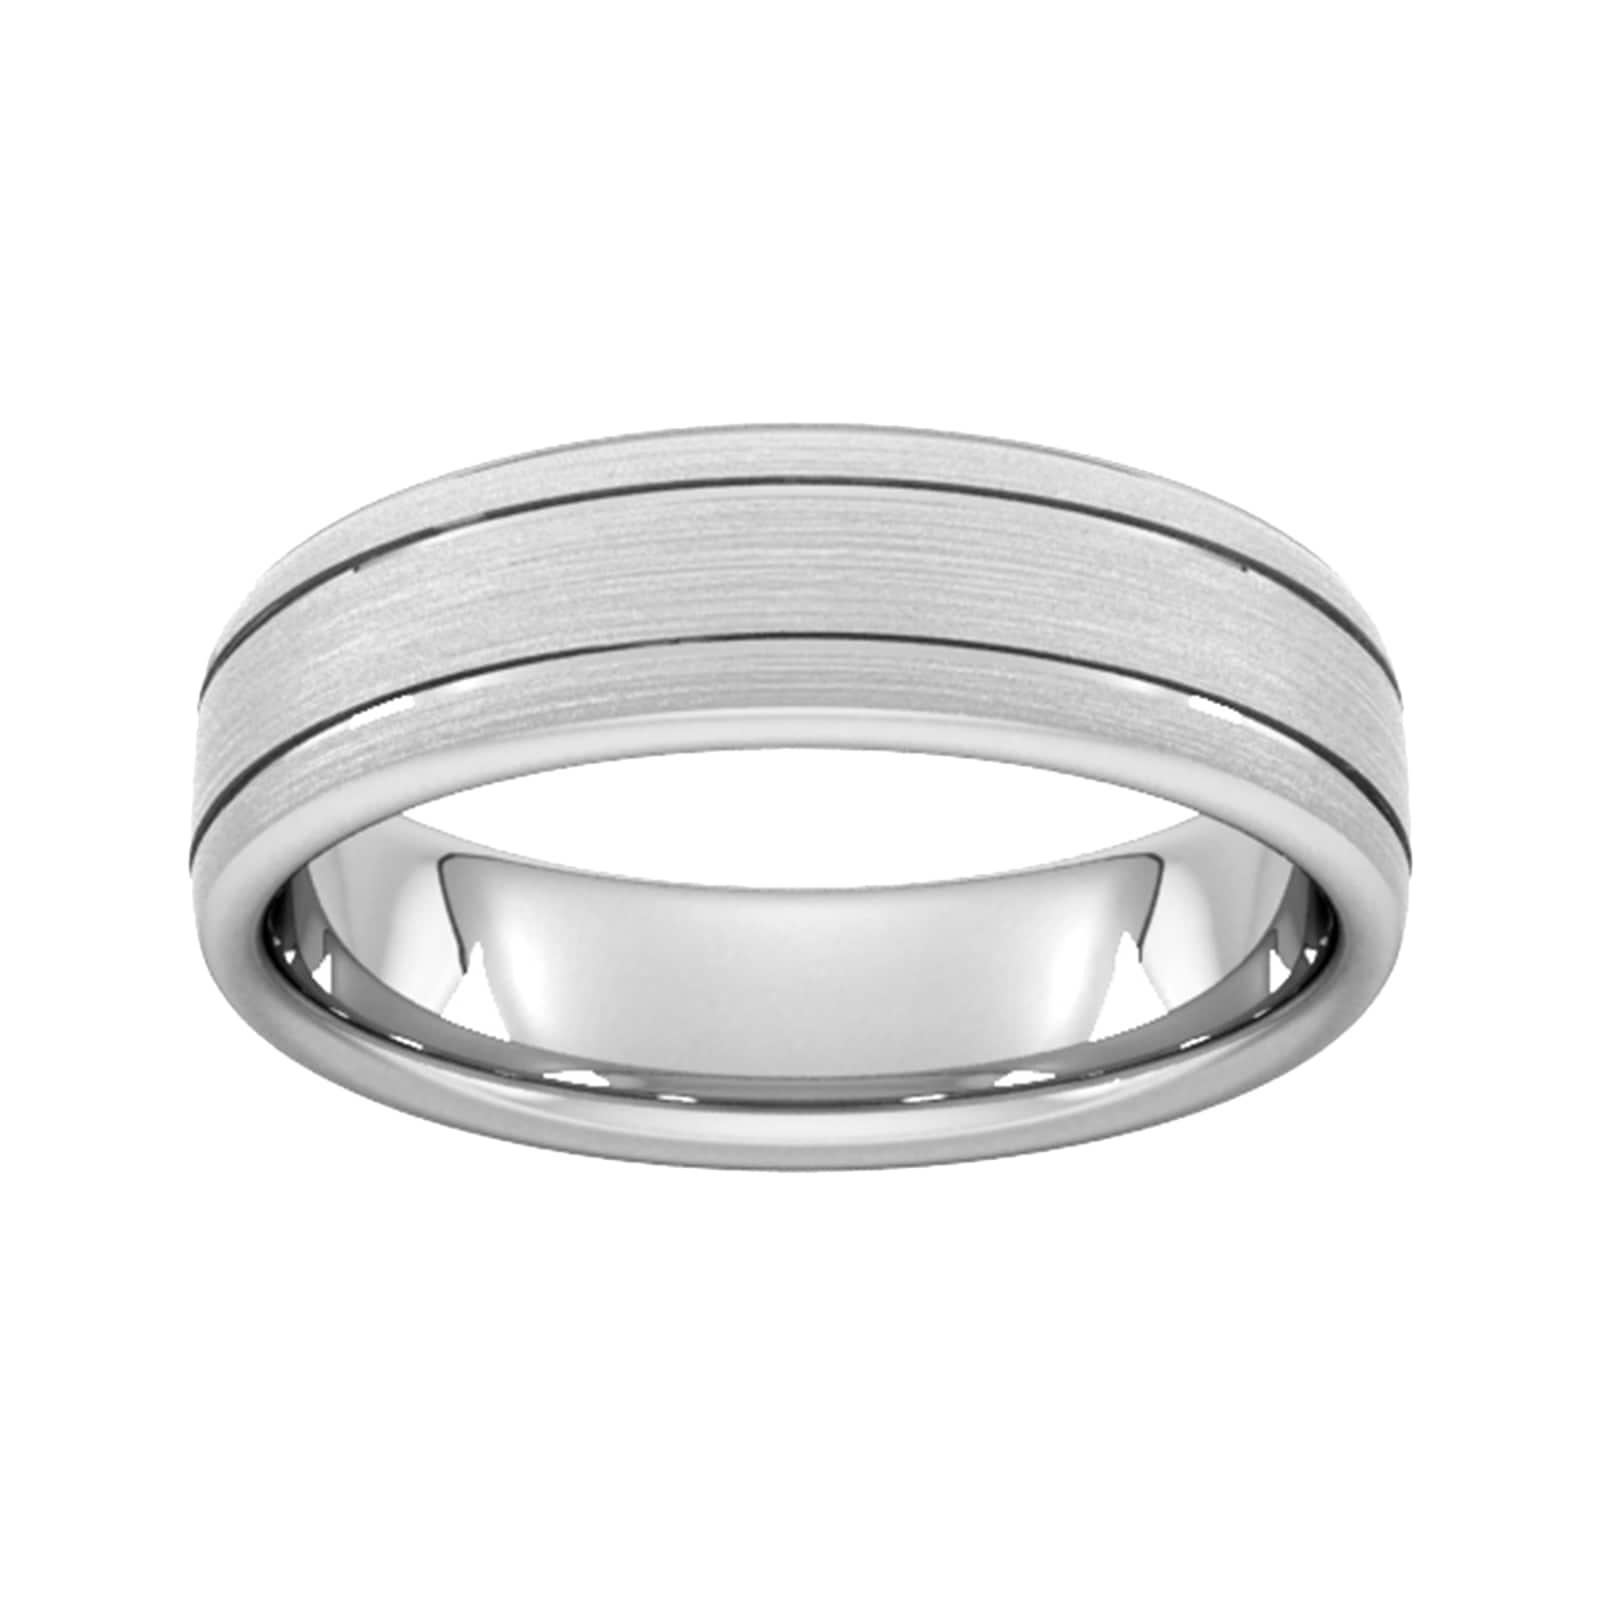 6mm Slight Court Heavy Matt Finish With Double Grooves Wedding Ring In 18 Carat White Gold - Ring Size Y